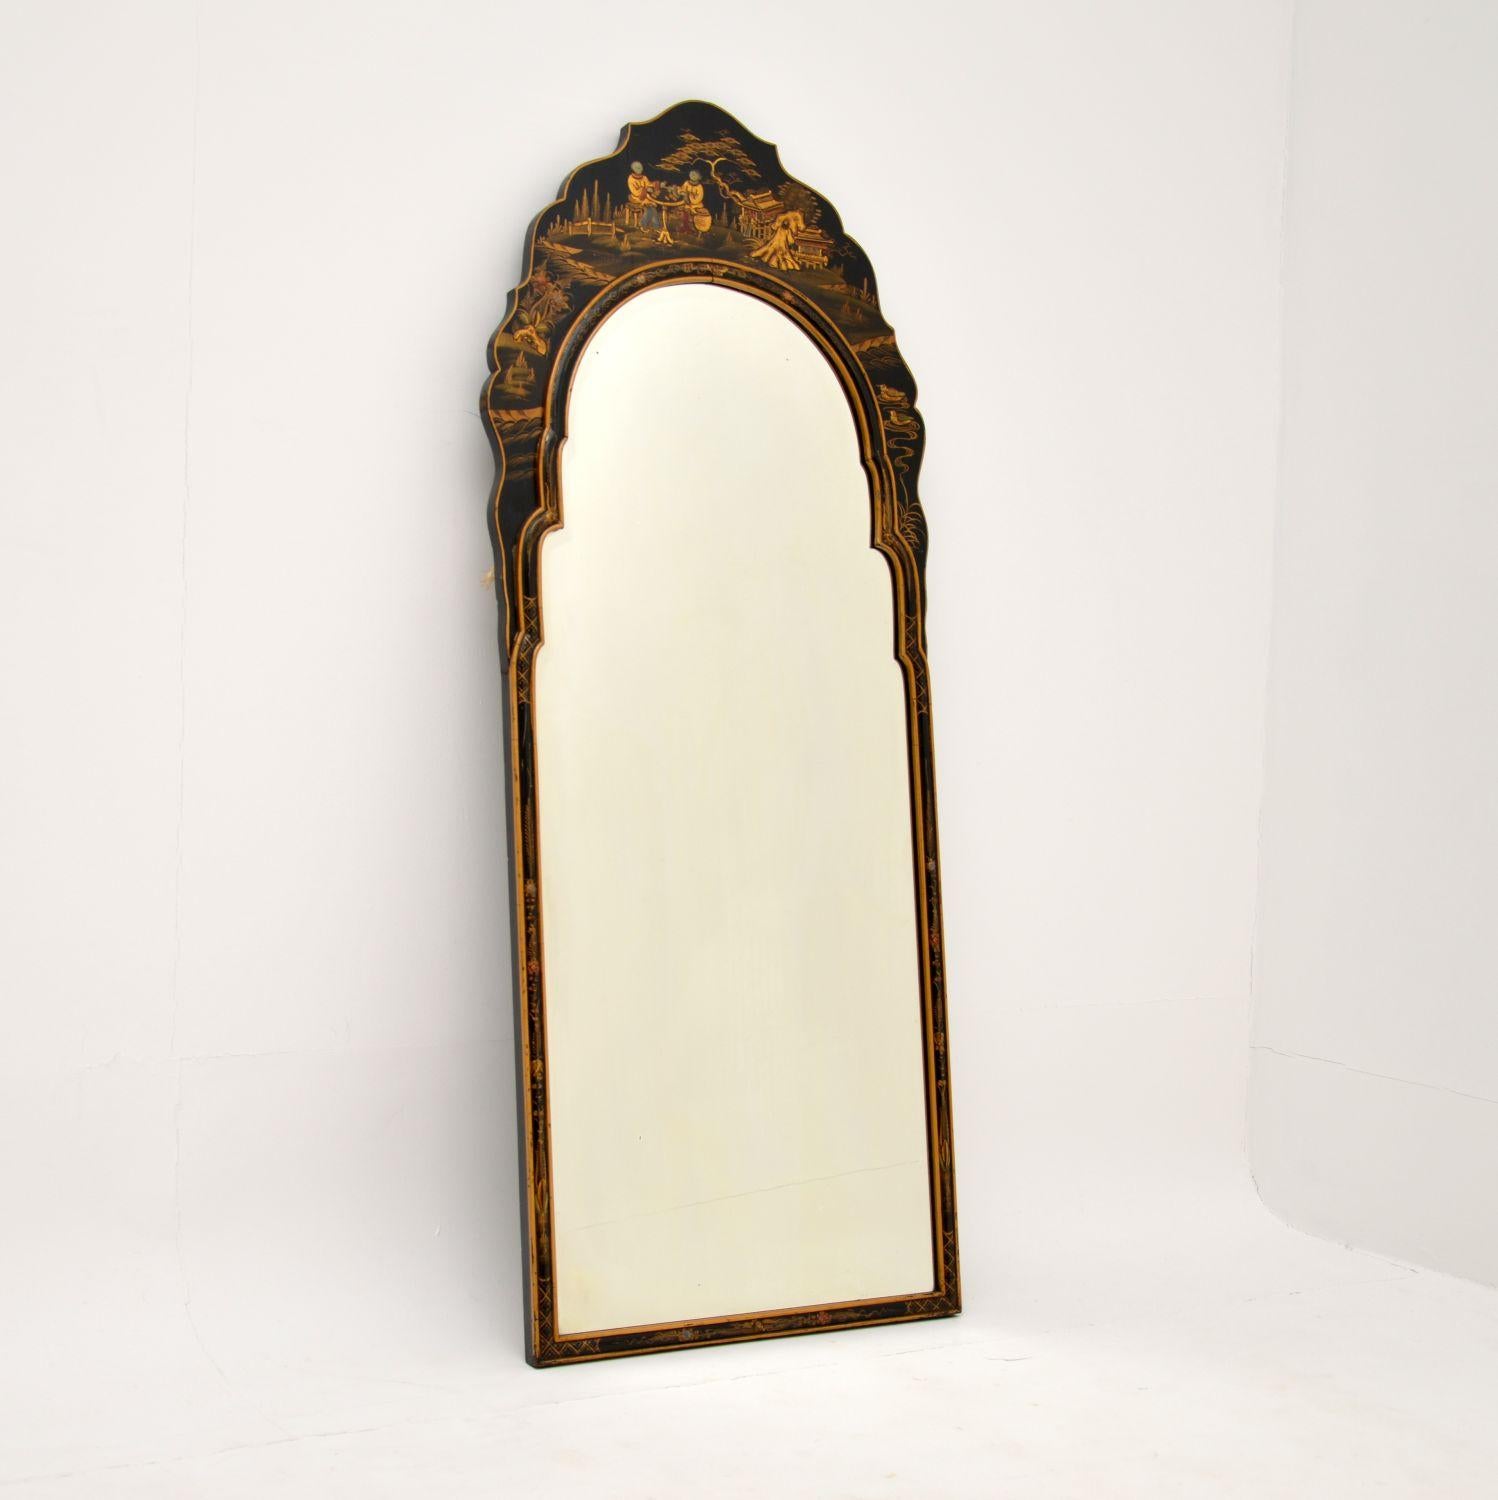 A stunning antique Queen Anne style lacquered chinoiserie mirror, with Chinese influence. This was made in England, it dates from around the 1920’s period.

The quality is fabulous, the black lacquered wood frame has stunning paintings in mostly